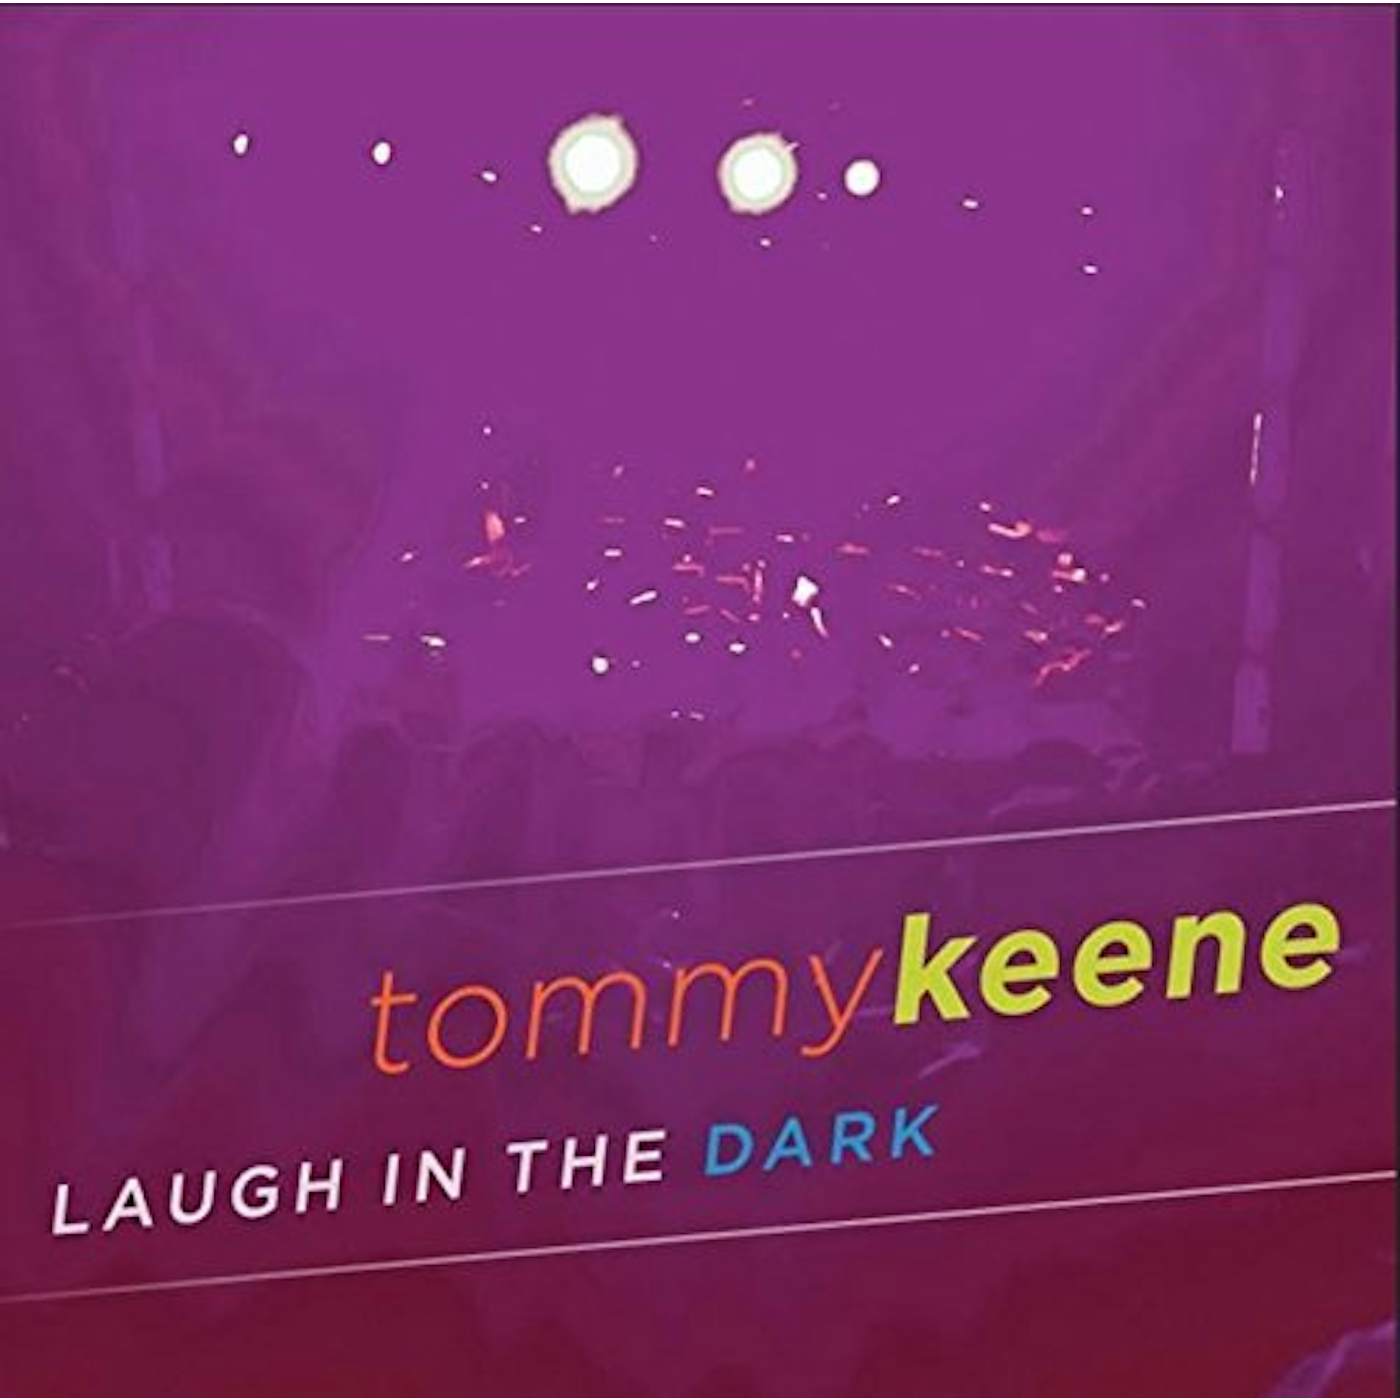 Tommy Keene LAUGH IN THE DARK CD